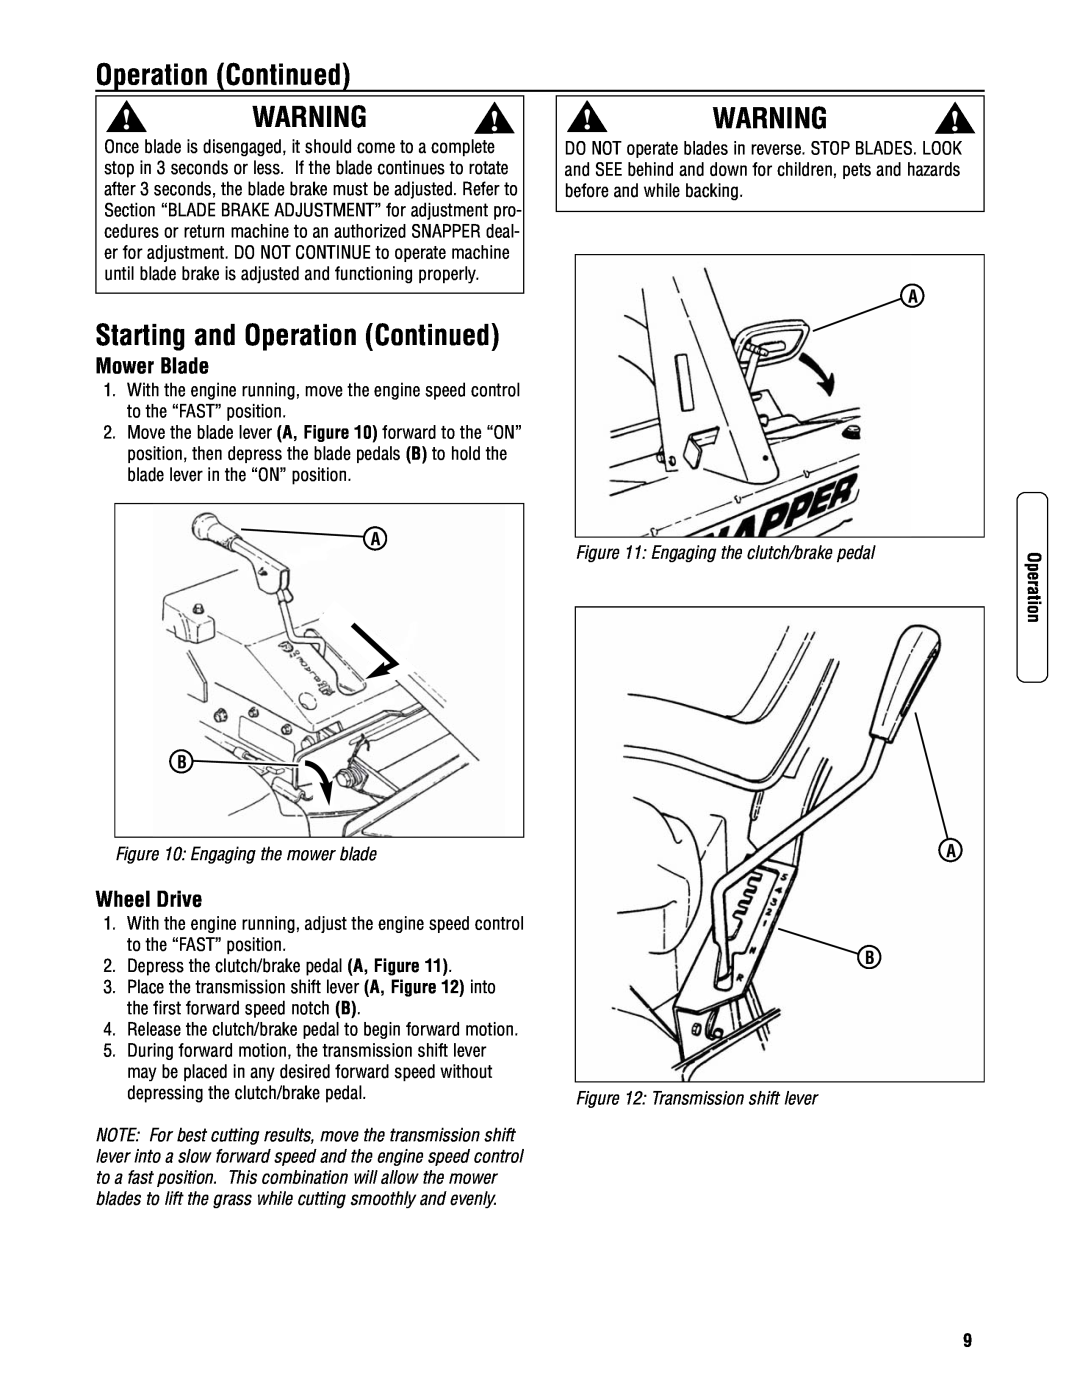 Snapper 3317523BVE specifications Starting and Operation Continued, Mower Blade, Wheel Drive, Engaging the mower blade 